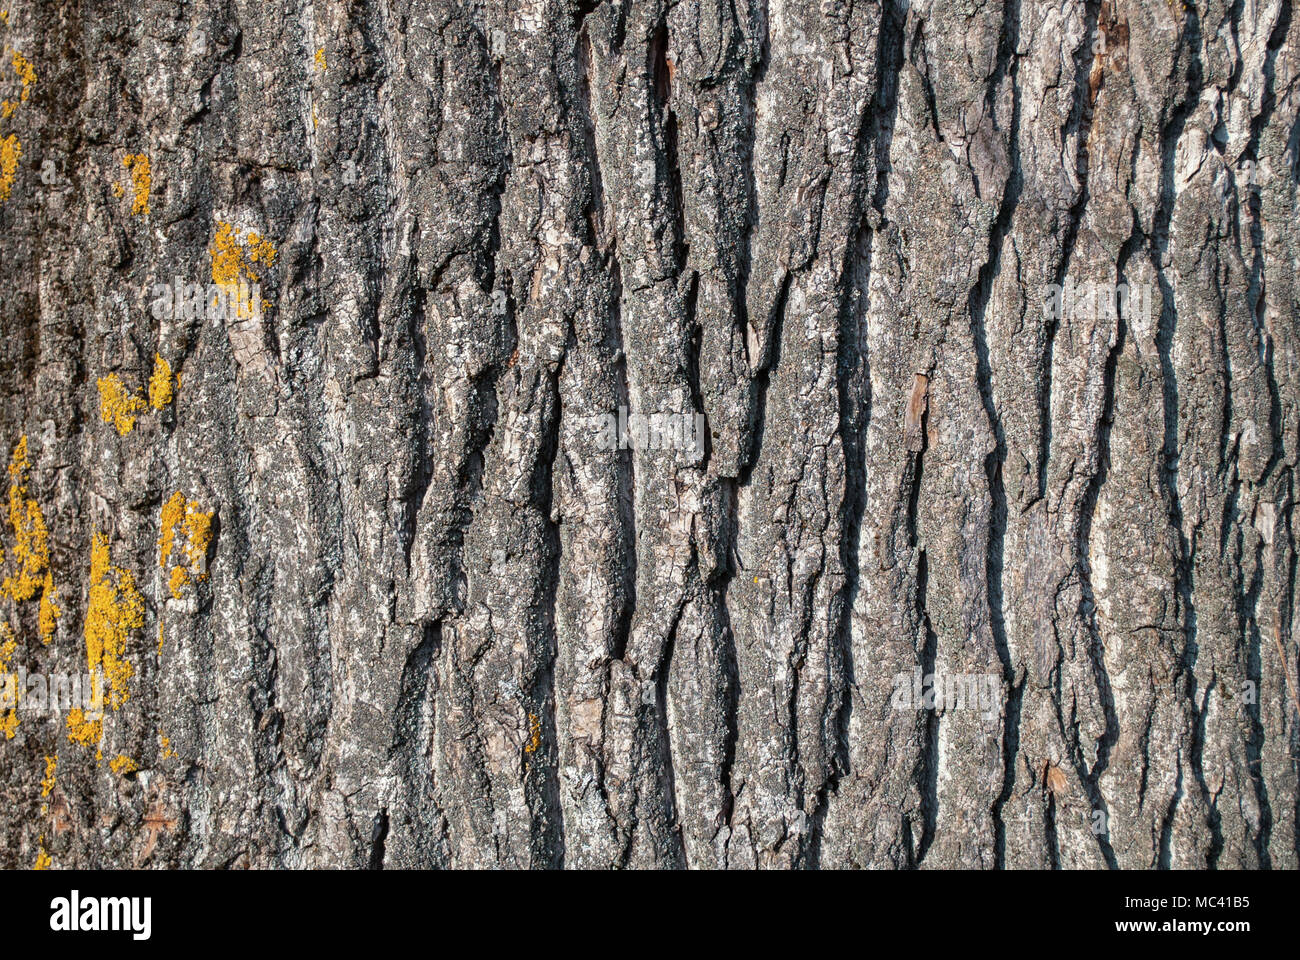 Wood bark texture on daylight in nature with grooves Stock Photo